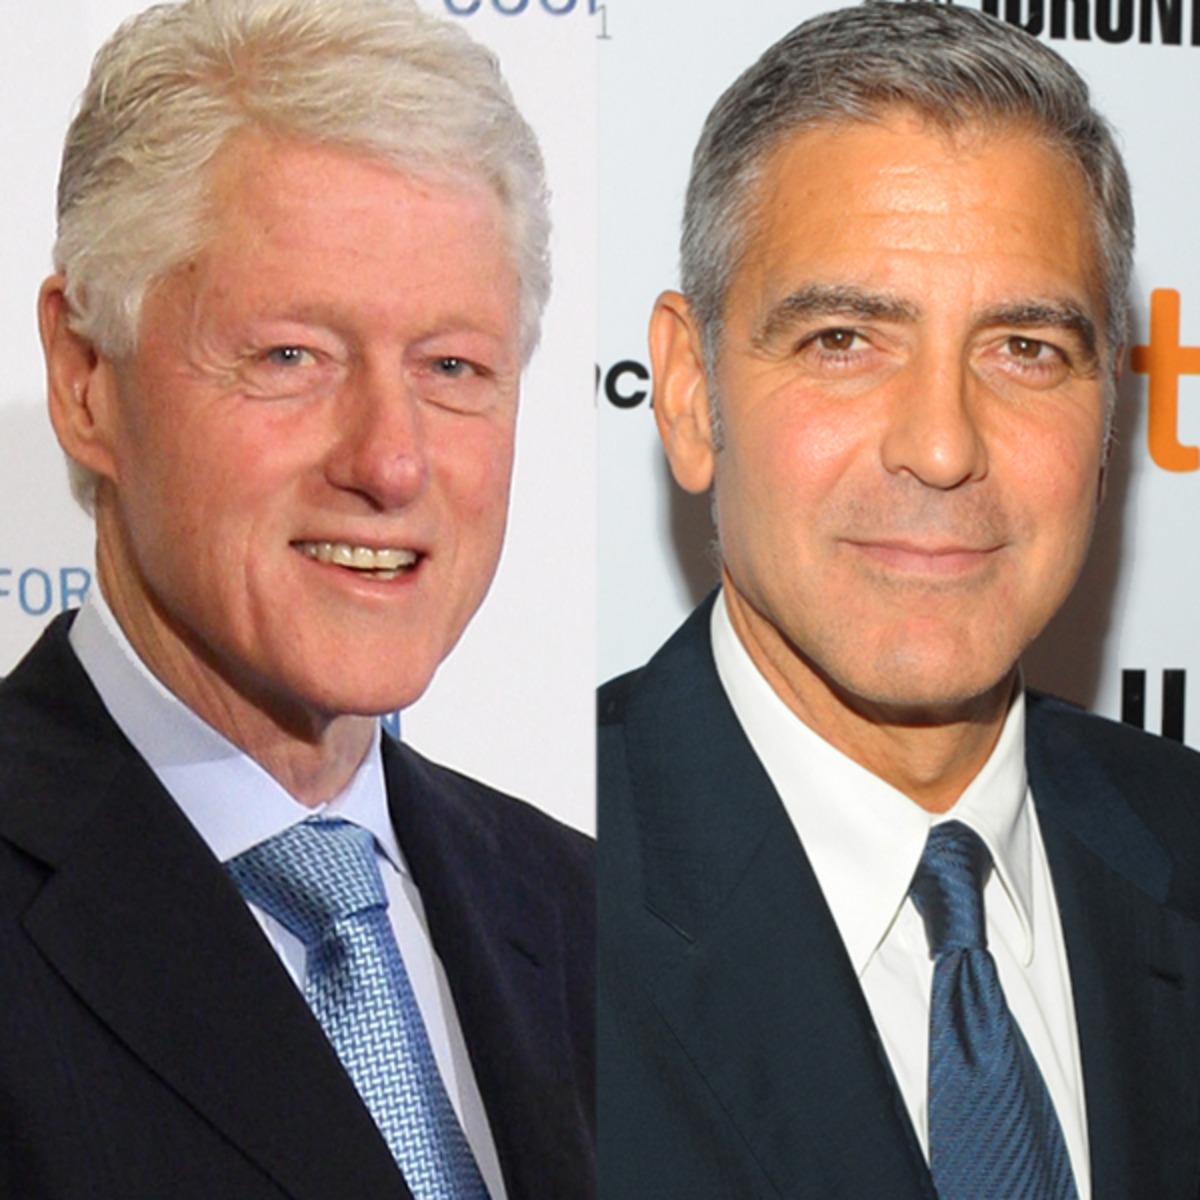 Paging George Clooney: Bill Clinton Wants You to Play Him